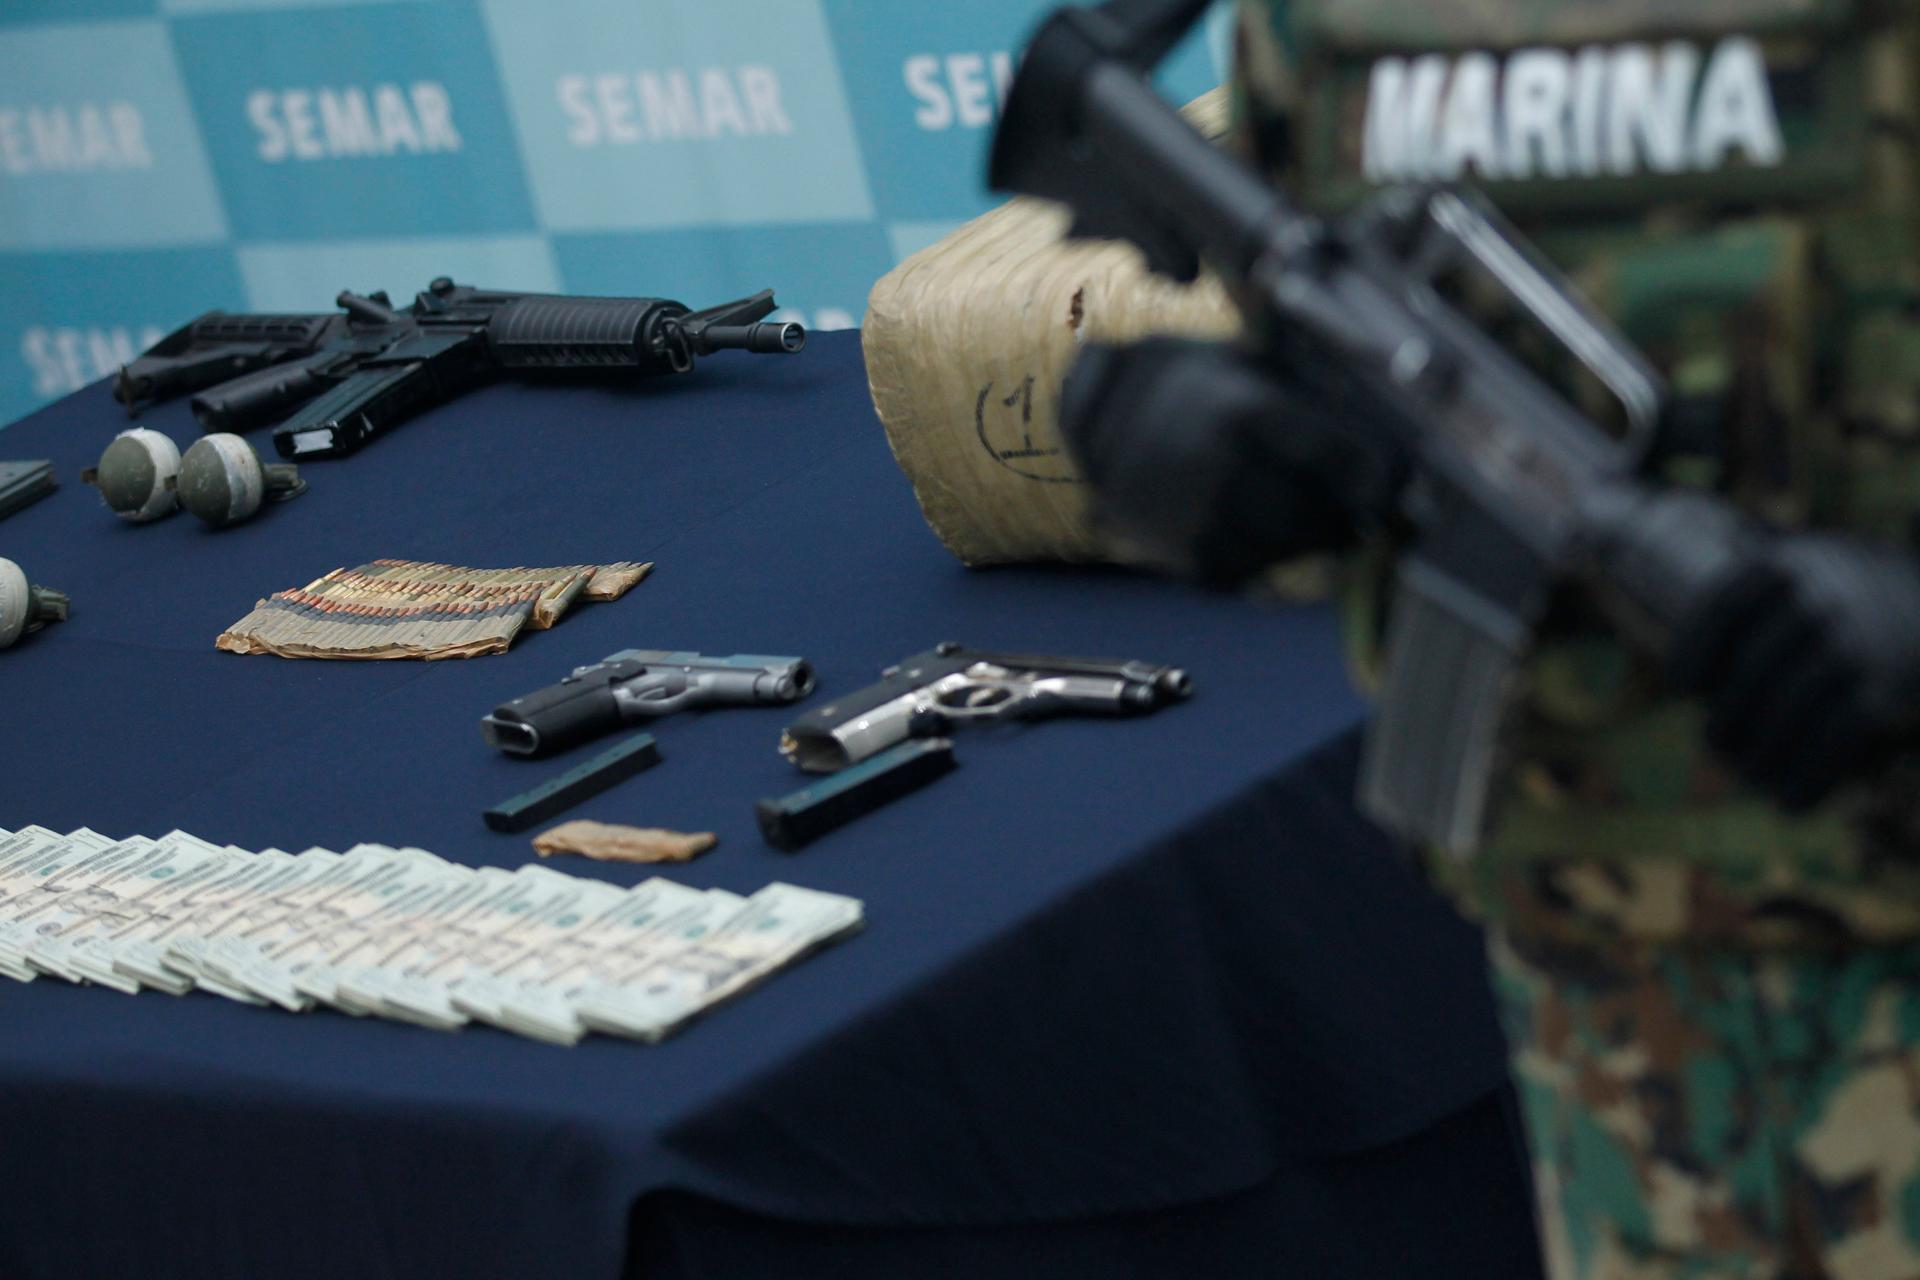 Many of the arms used by Mexican cartels come from the US and Central America, but that's not the full story.